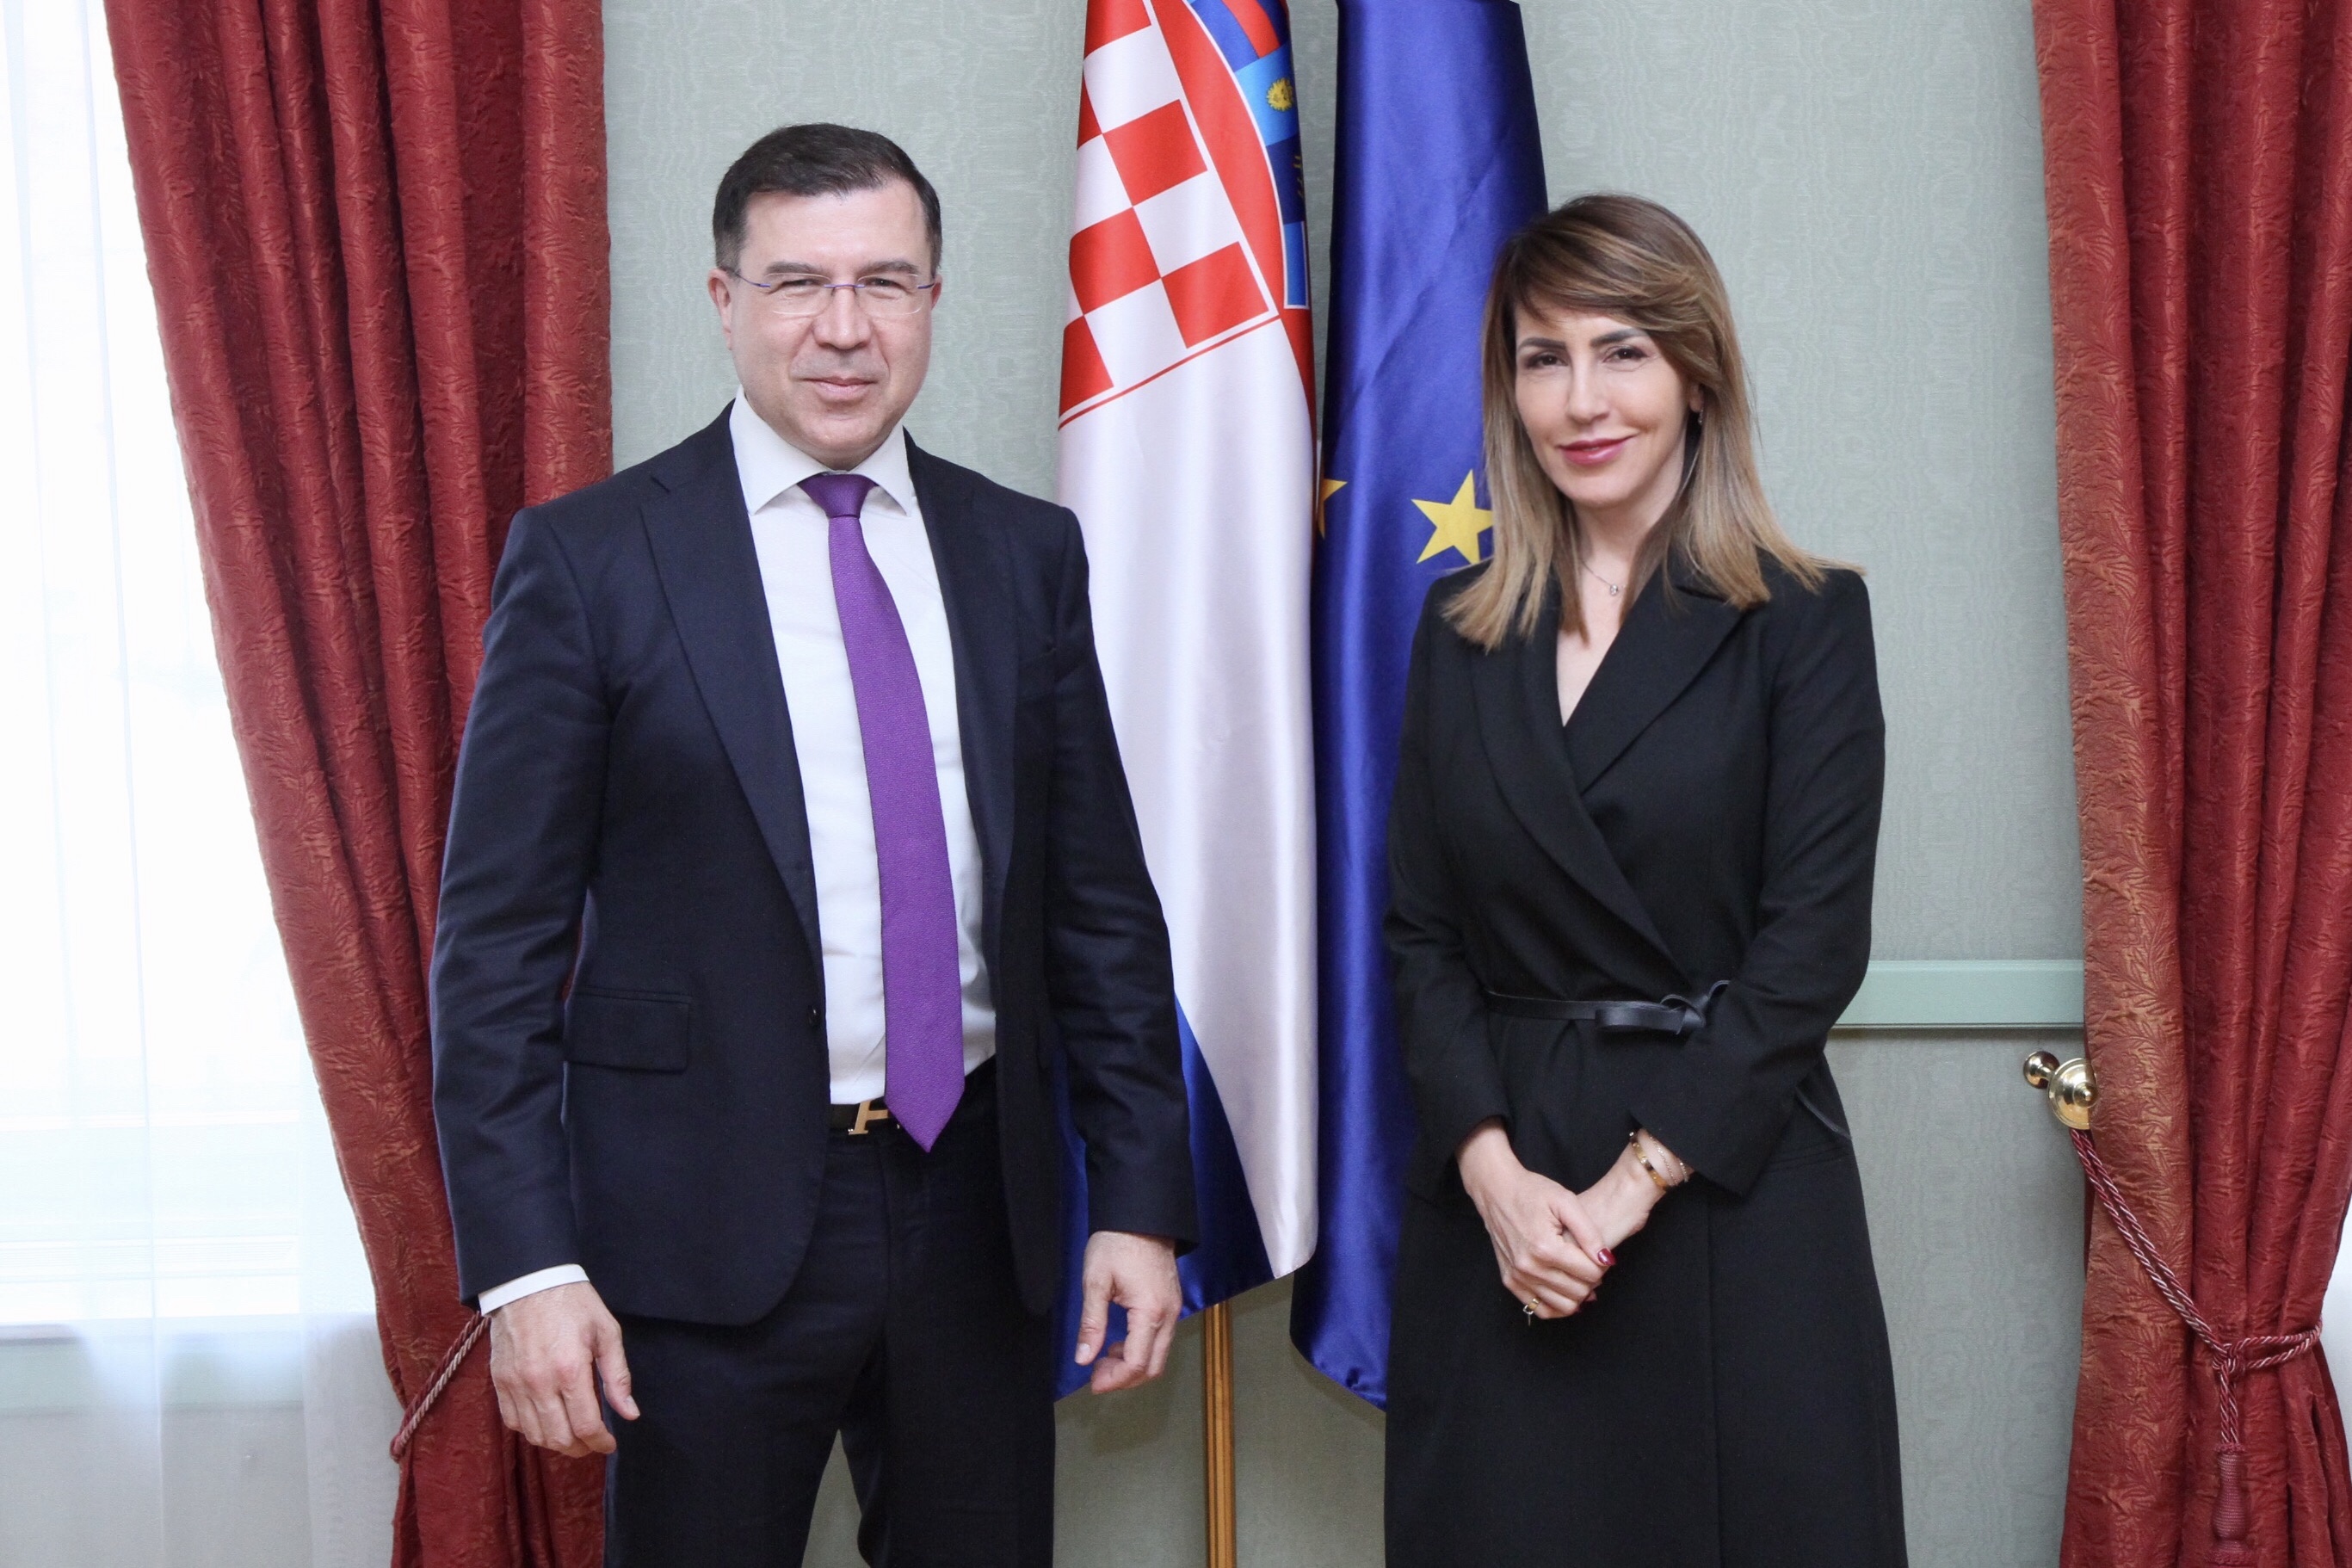 Secretary General of the Regional Cooperation Council (RCC) Majlinda Bregu with  Domagoj Ivan Milošević, Chairperson of the European Affairs Committee, during SG's official visit to Croatia,in Zagreb on 18 April 2019 (Photo: Courtesy of Croatian Parliament)